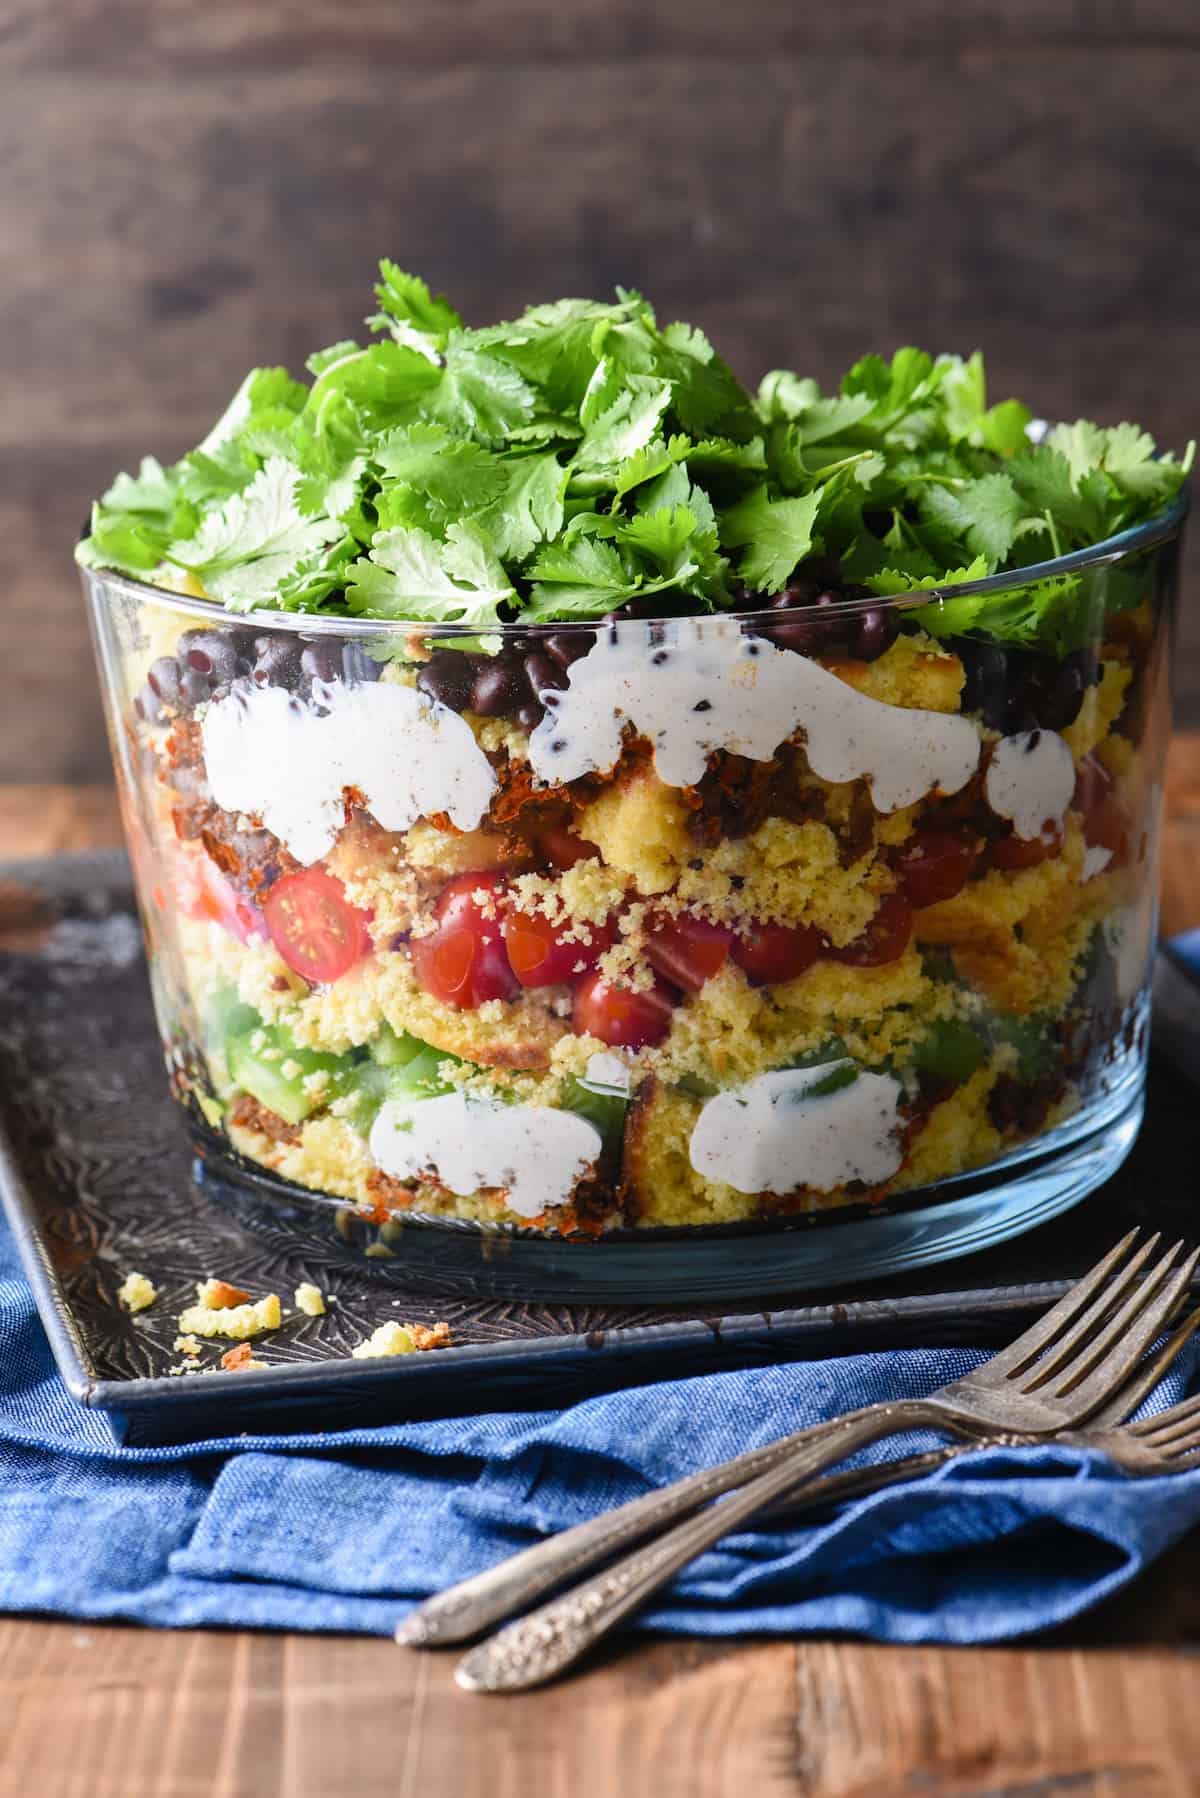 Having a backyard barbecue or going to a potluck? This Layered Southwestern Cornbread Salad can be made in advance and served cold. With the layers of colors and flavors, it's certain to stand out on the buffet table. | foxeslovelemons.com